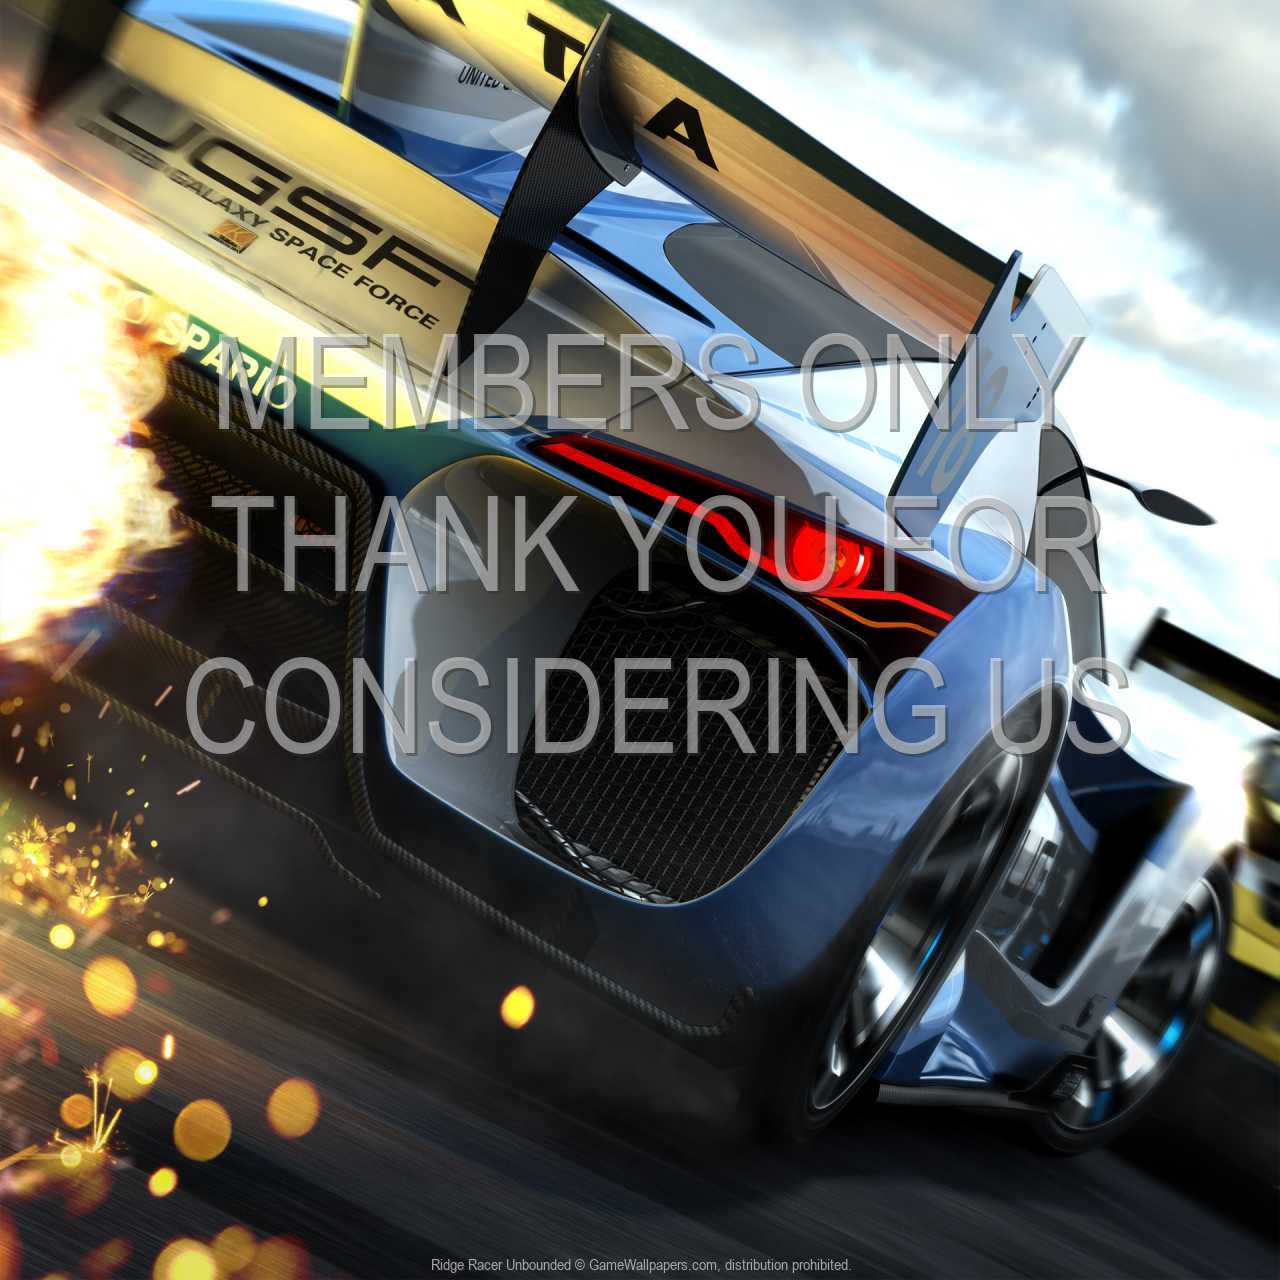 Ridge Racer Unbounded 720p%20Horizontal Mobile wallpaper or background 03